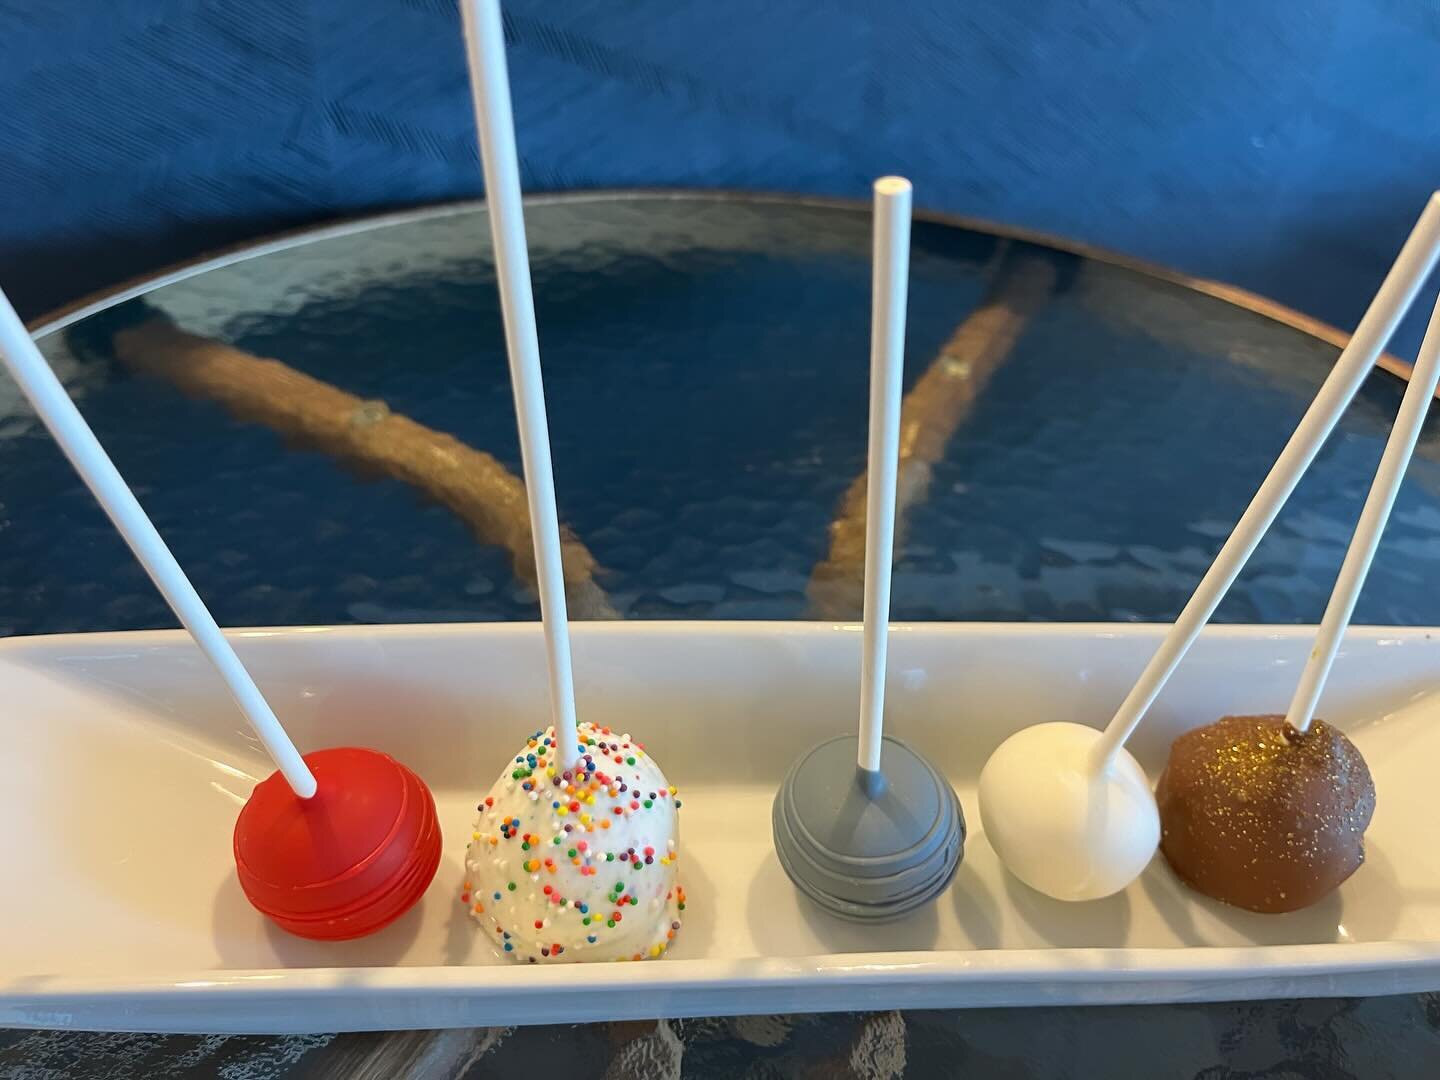 ☀️Who&rsquo;s ready for the weekend? Come in and stock up on Cake Pops while you can with our eclipse weekend BOGO special! Buy One Cake Pop &amp; Get One FREE!! 

*Offer good while supplies last.*

#coffee #cakepops #dfwmom #fortworth #fortworthmom 